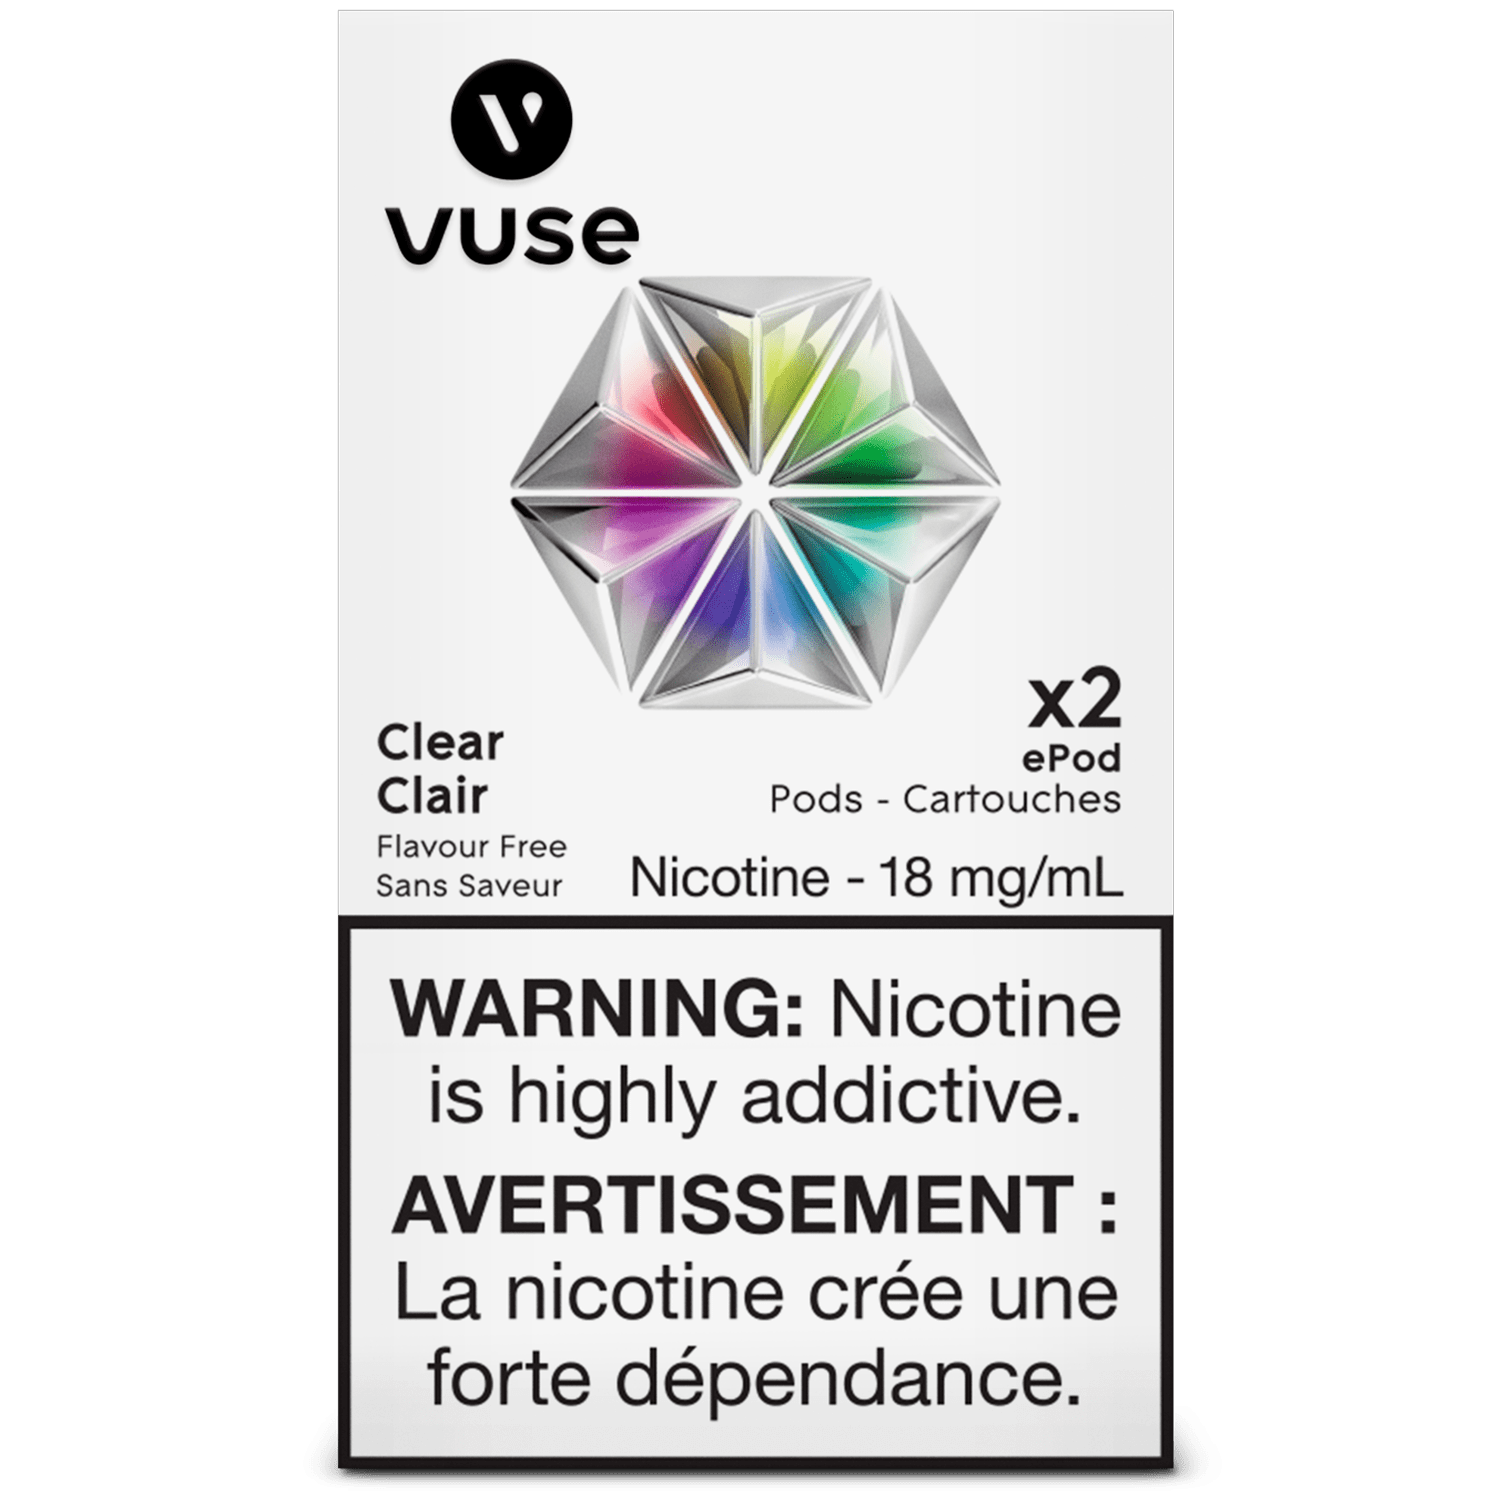 Vuse Alto ePods - Clear (2/Pack) available on Canada online vape shop